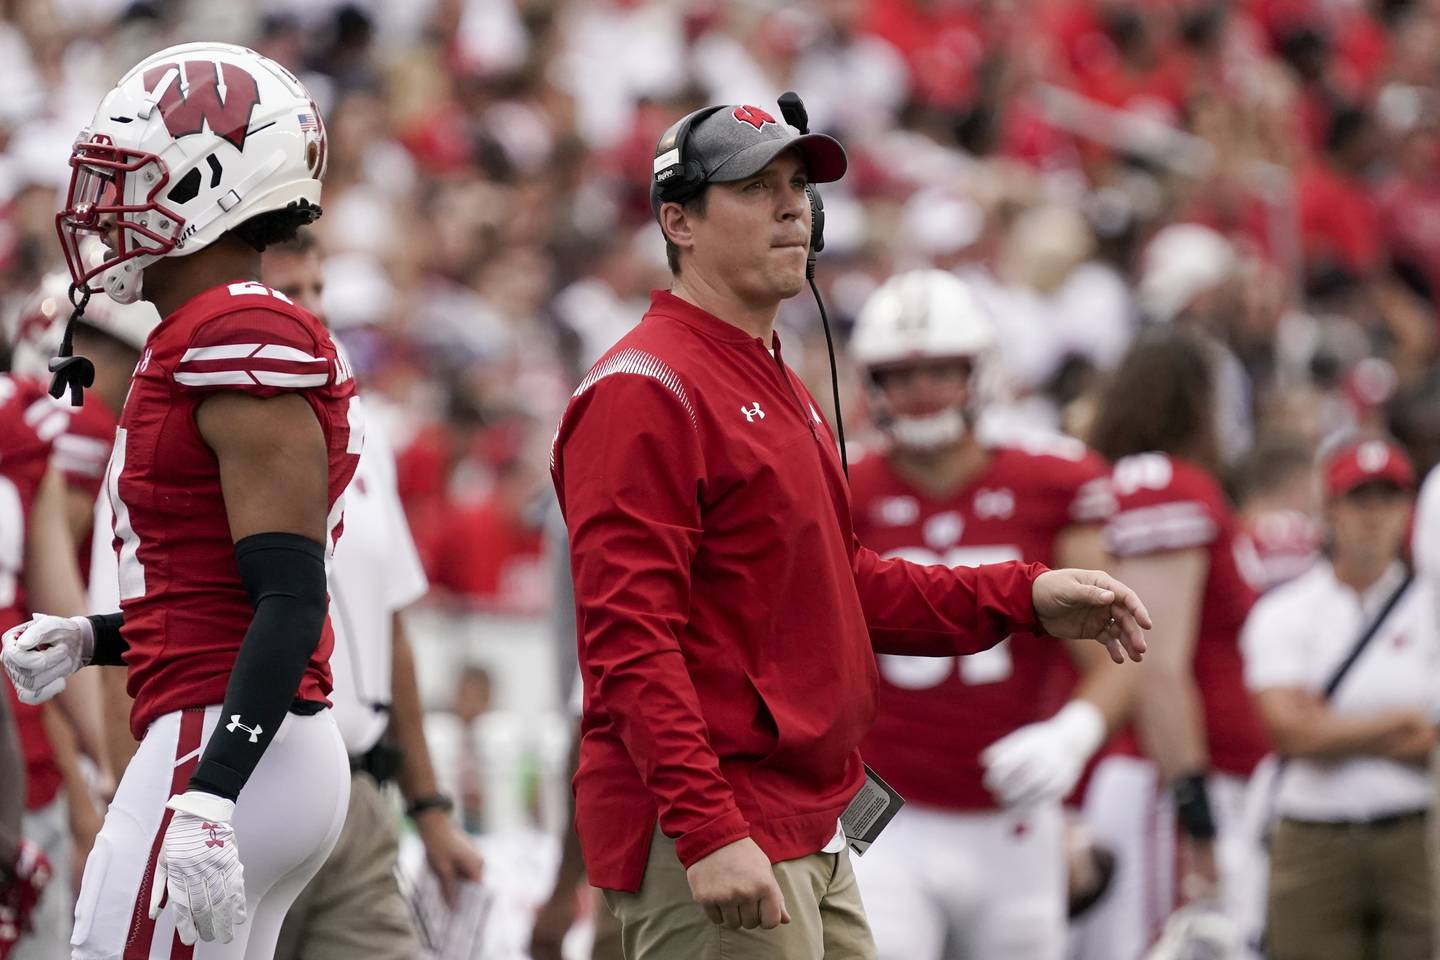 Wisconsin defensive coordinator Jim Leonhard looks on during a game against Penn State on Sept. 4, 2021.